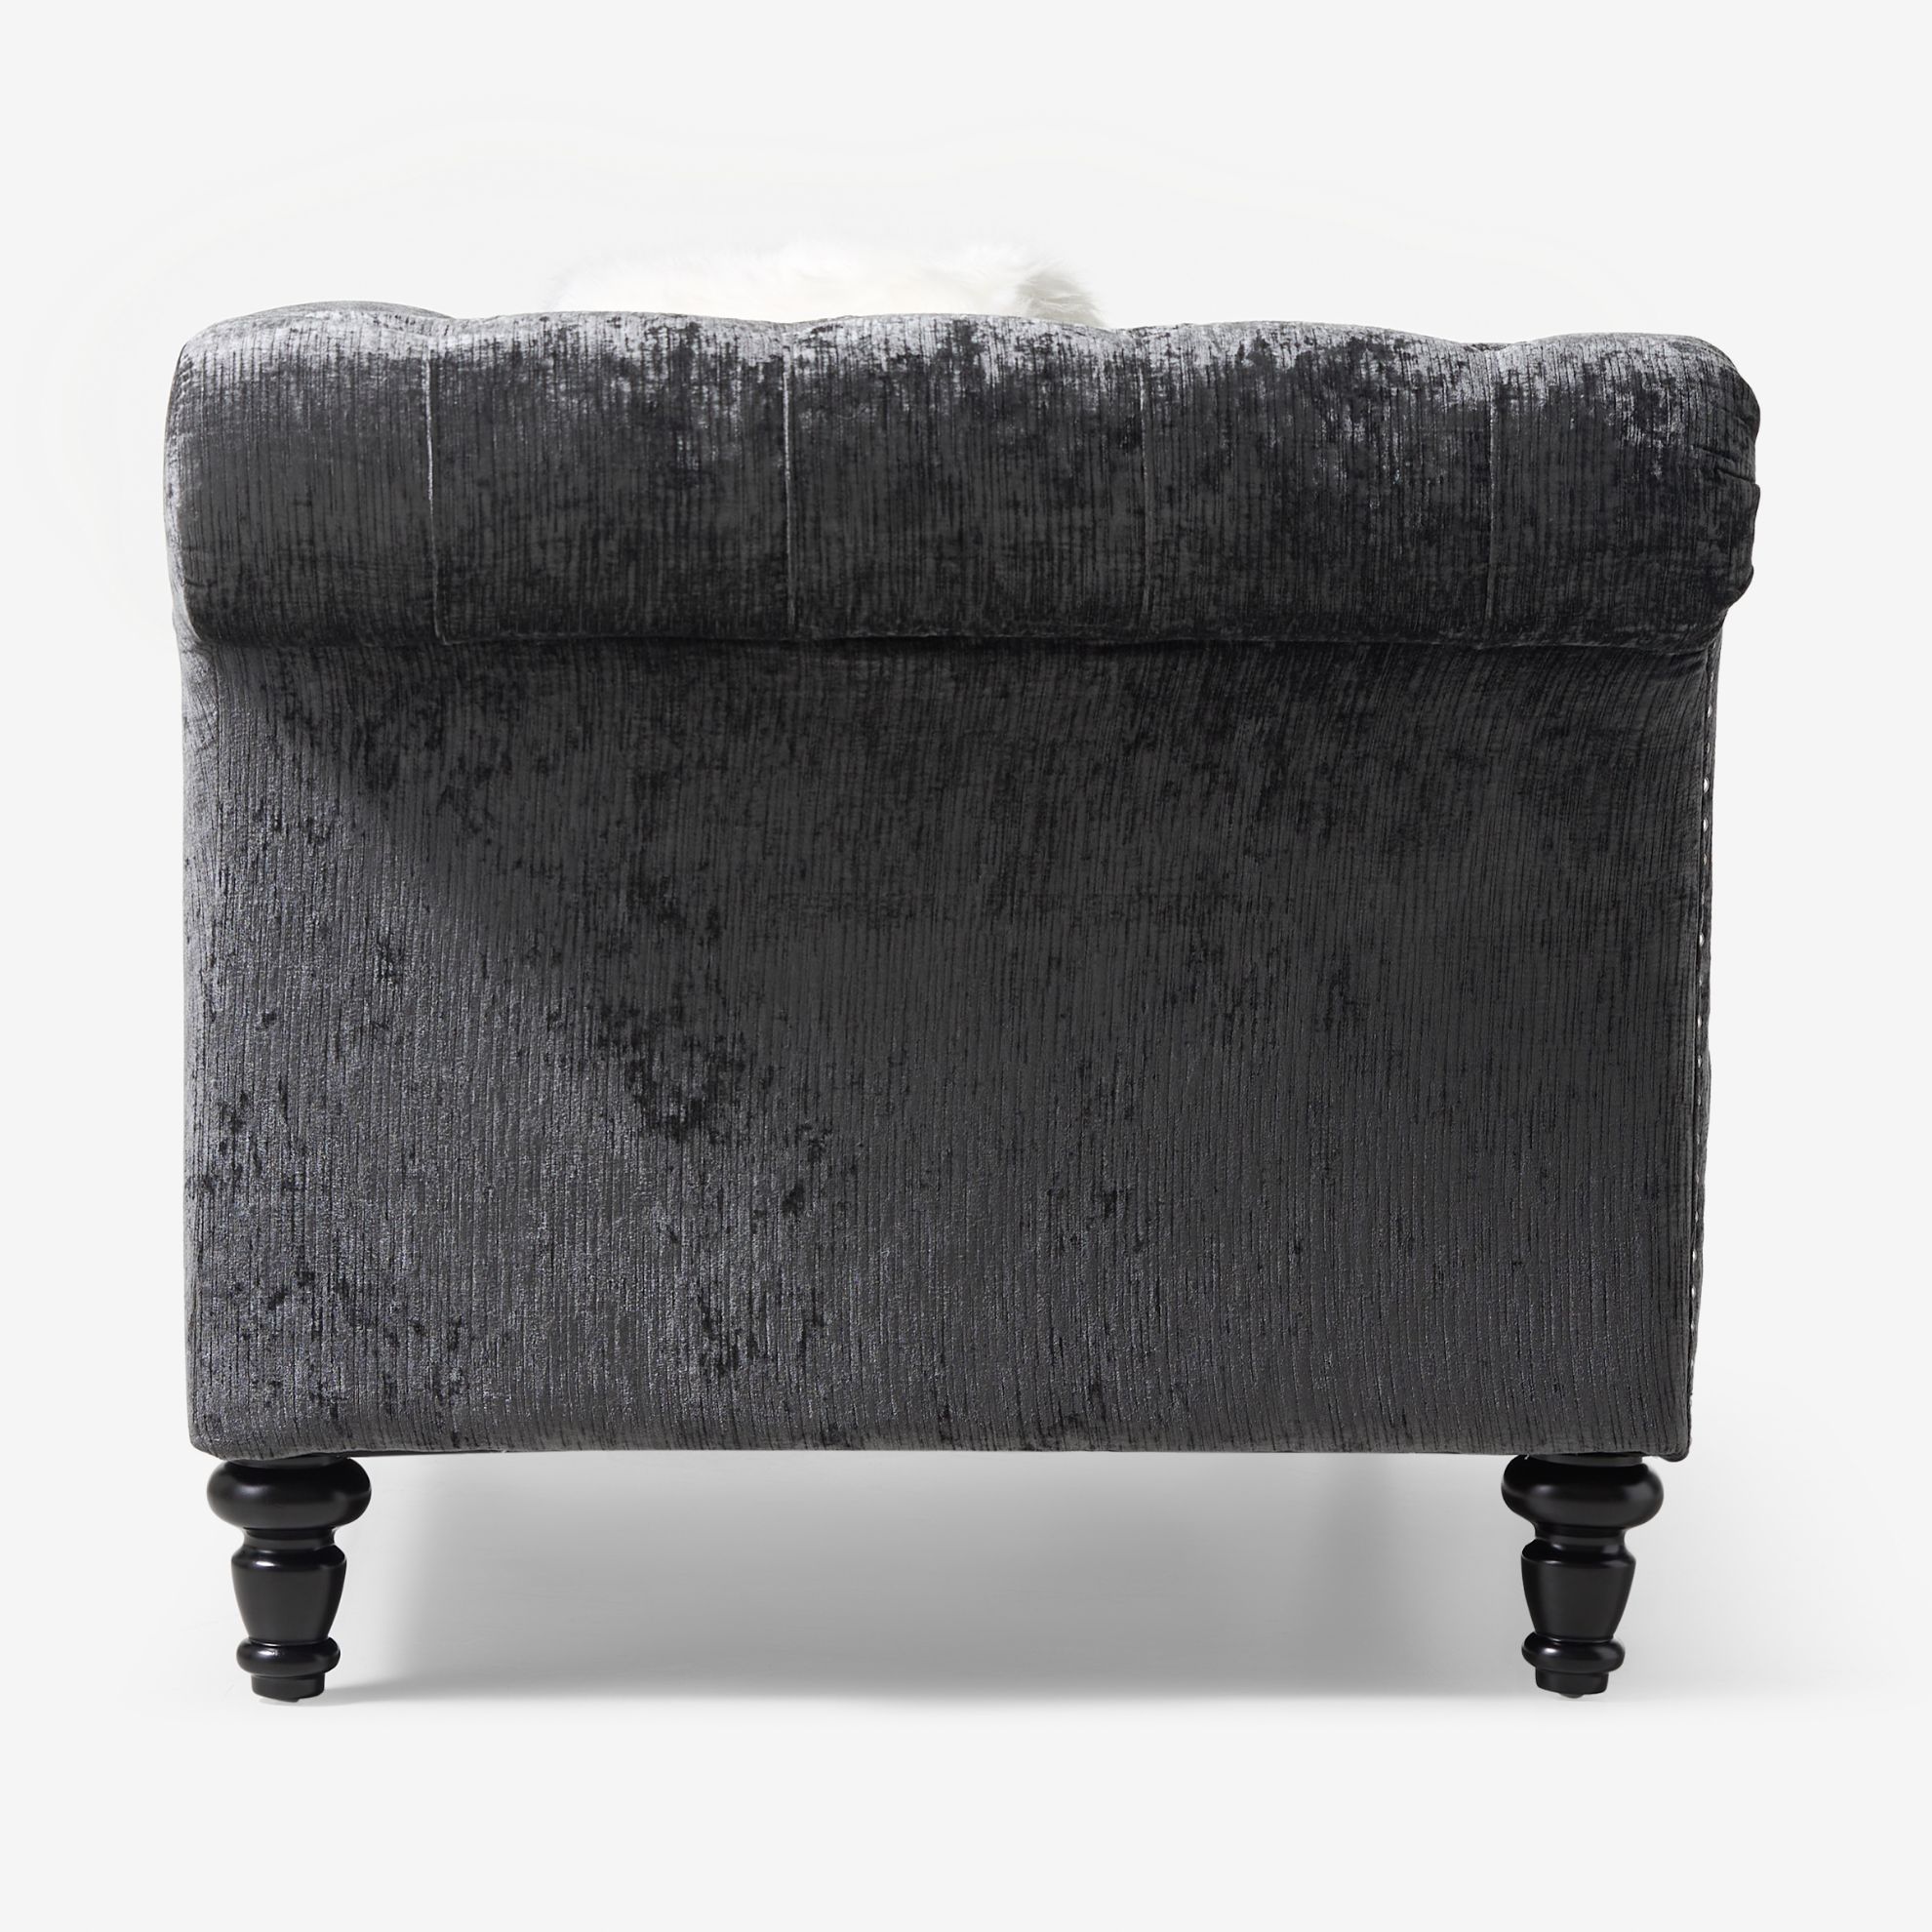 Picture of Hutton II Loveseat